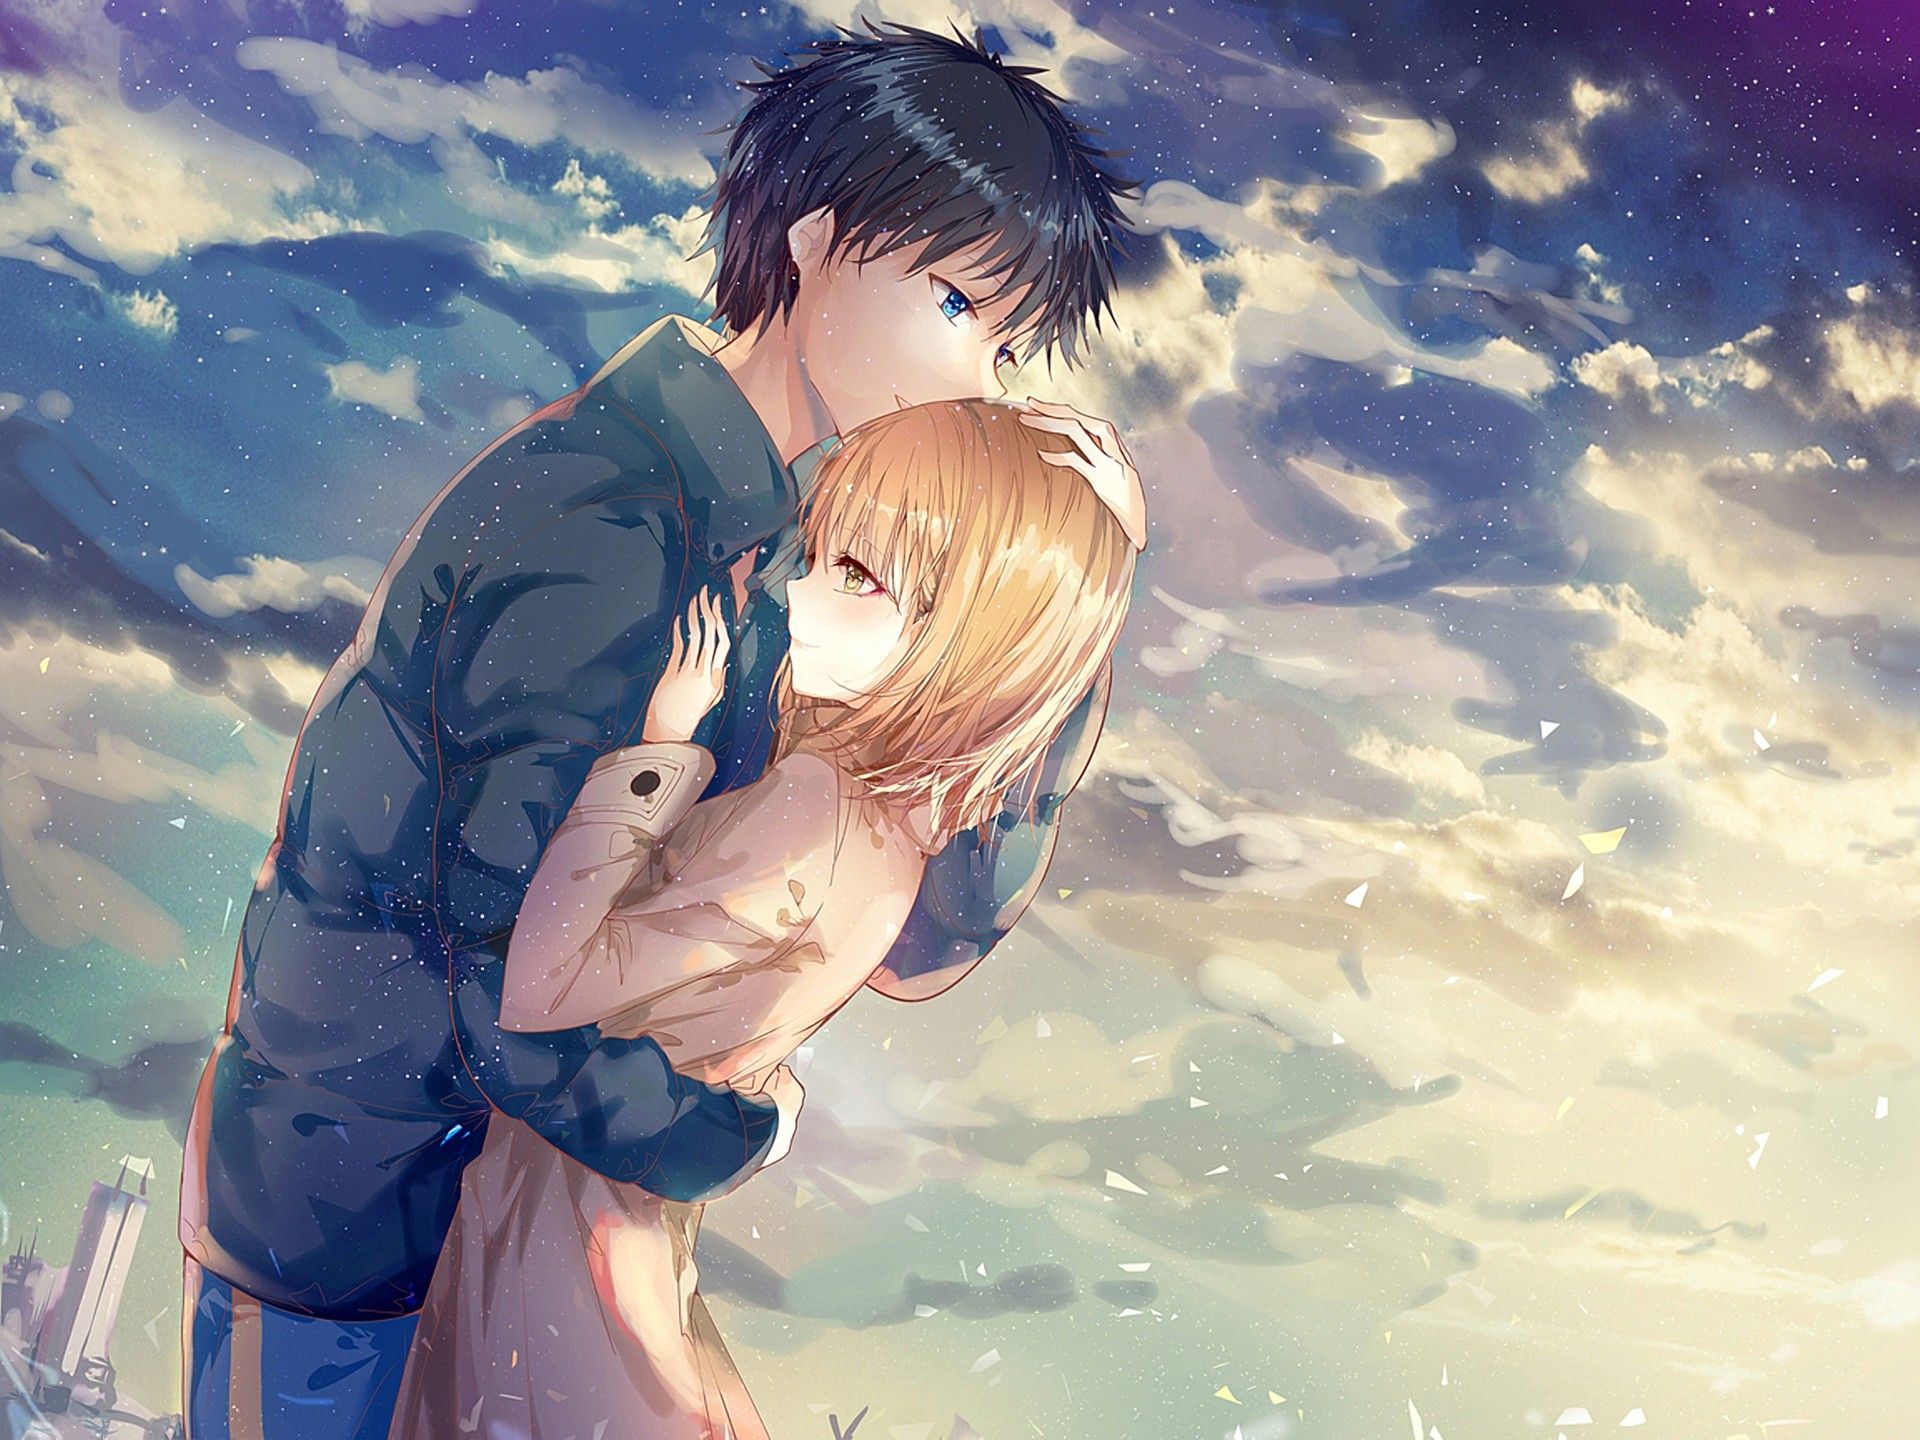 Sweet Couple Anime HD Wallpapers - Wallpaper Cave